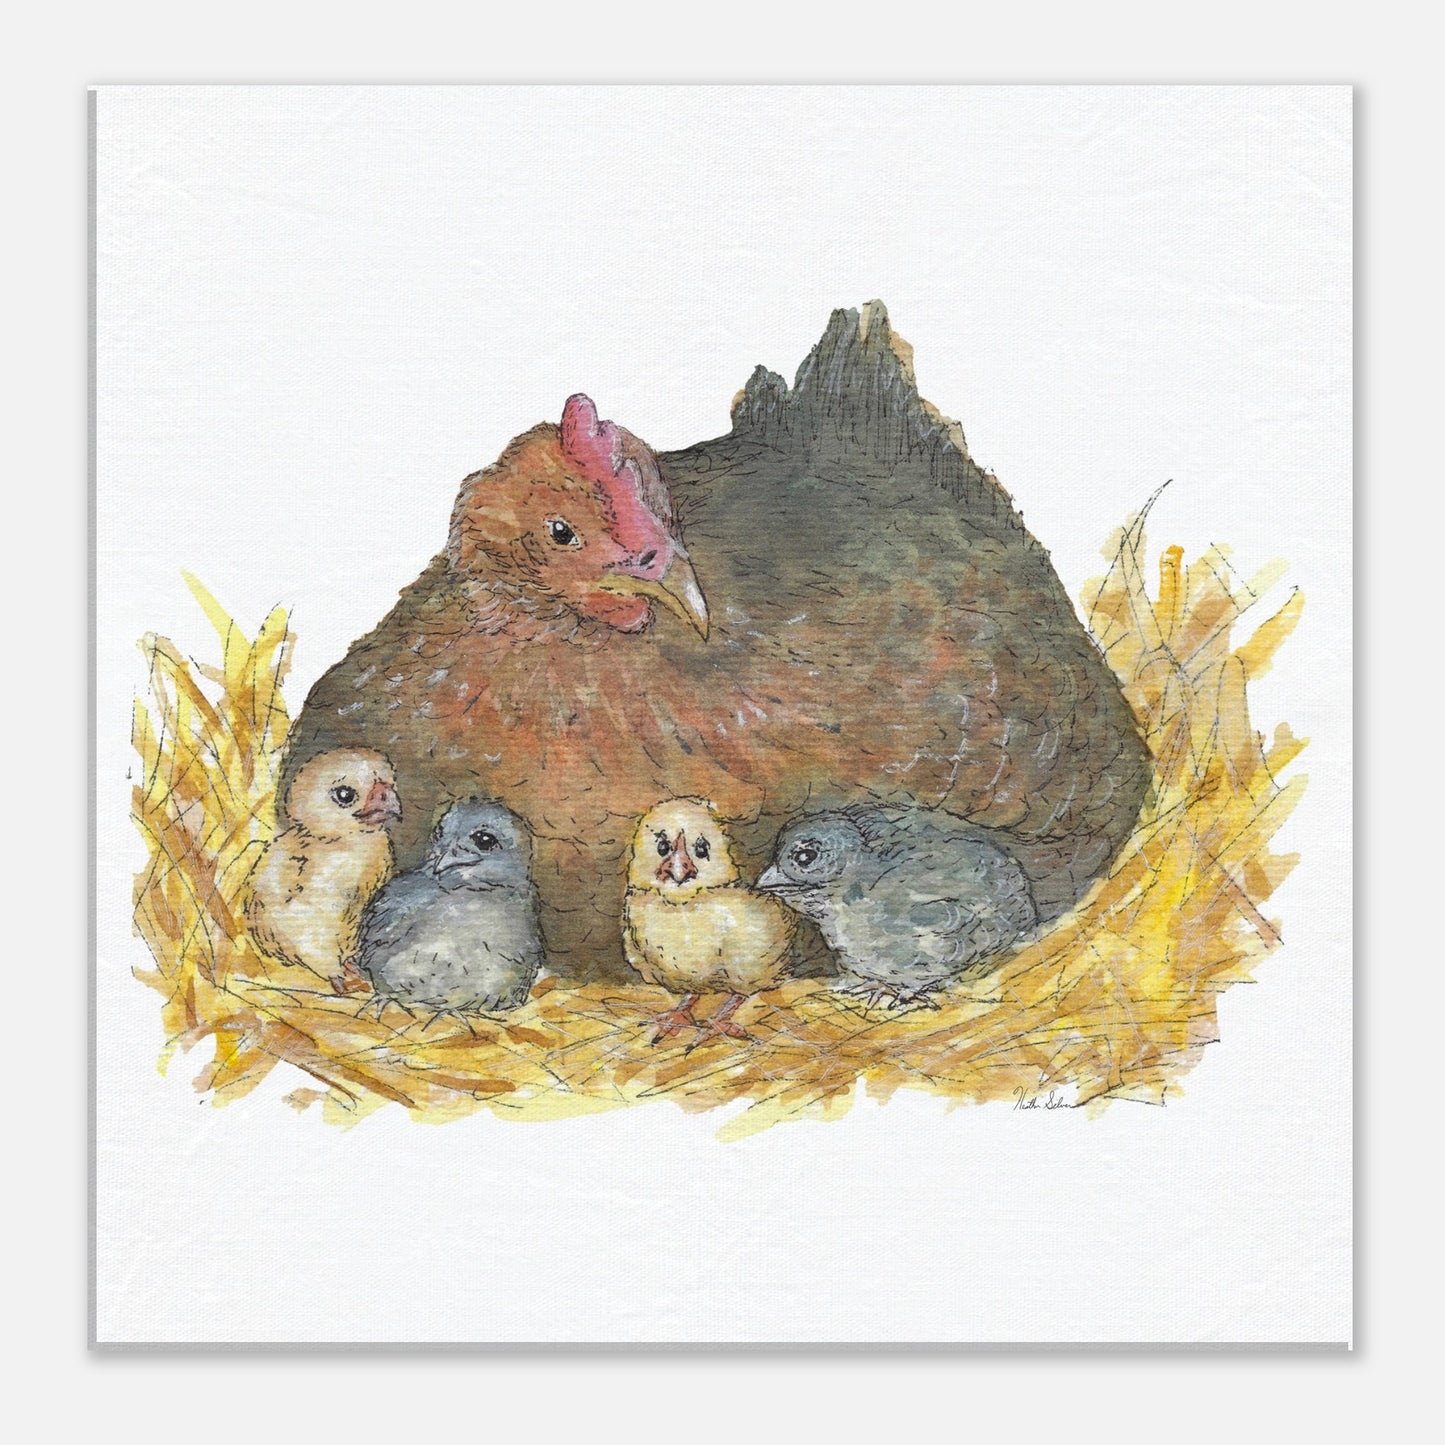 8 by 8 inch slim canvas Mother Hen print. Features a watercolor mother hen and her four chicks in a nest.